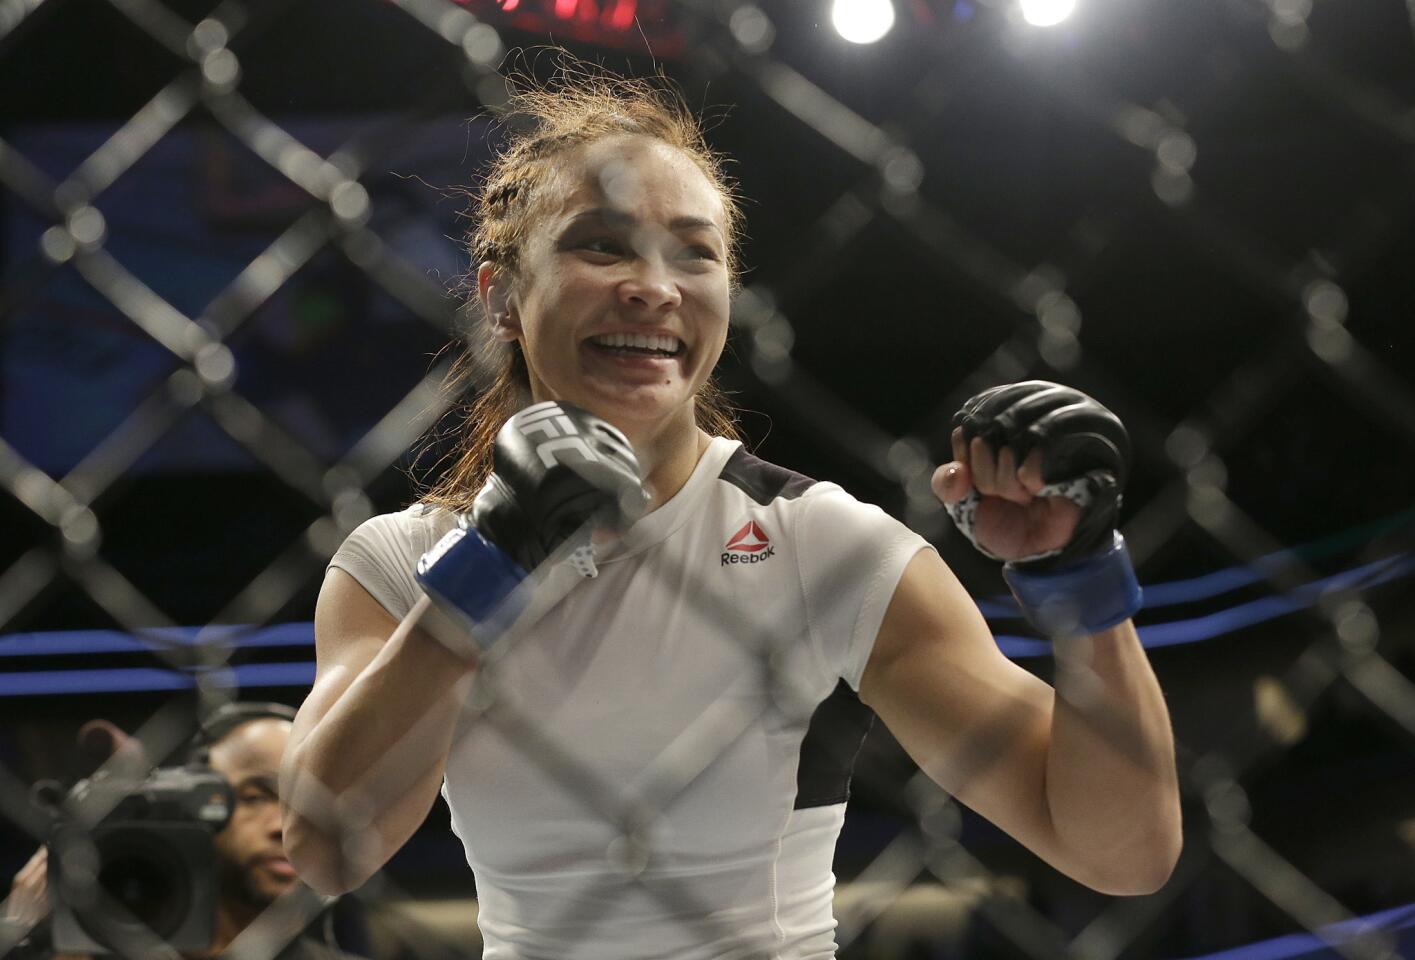 Michelle Waterson celebrates after beating Paige VanZant in a UFC Fight Night mixed martial arts fight in Sacramento, Calif., Saturday, Dec. 17, 2016. Waterson won by submission in the first round. (AP Photo/Jeff Chiu)